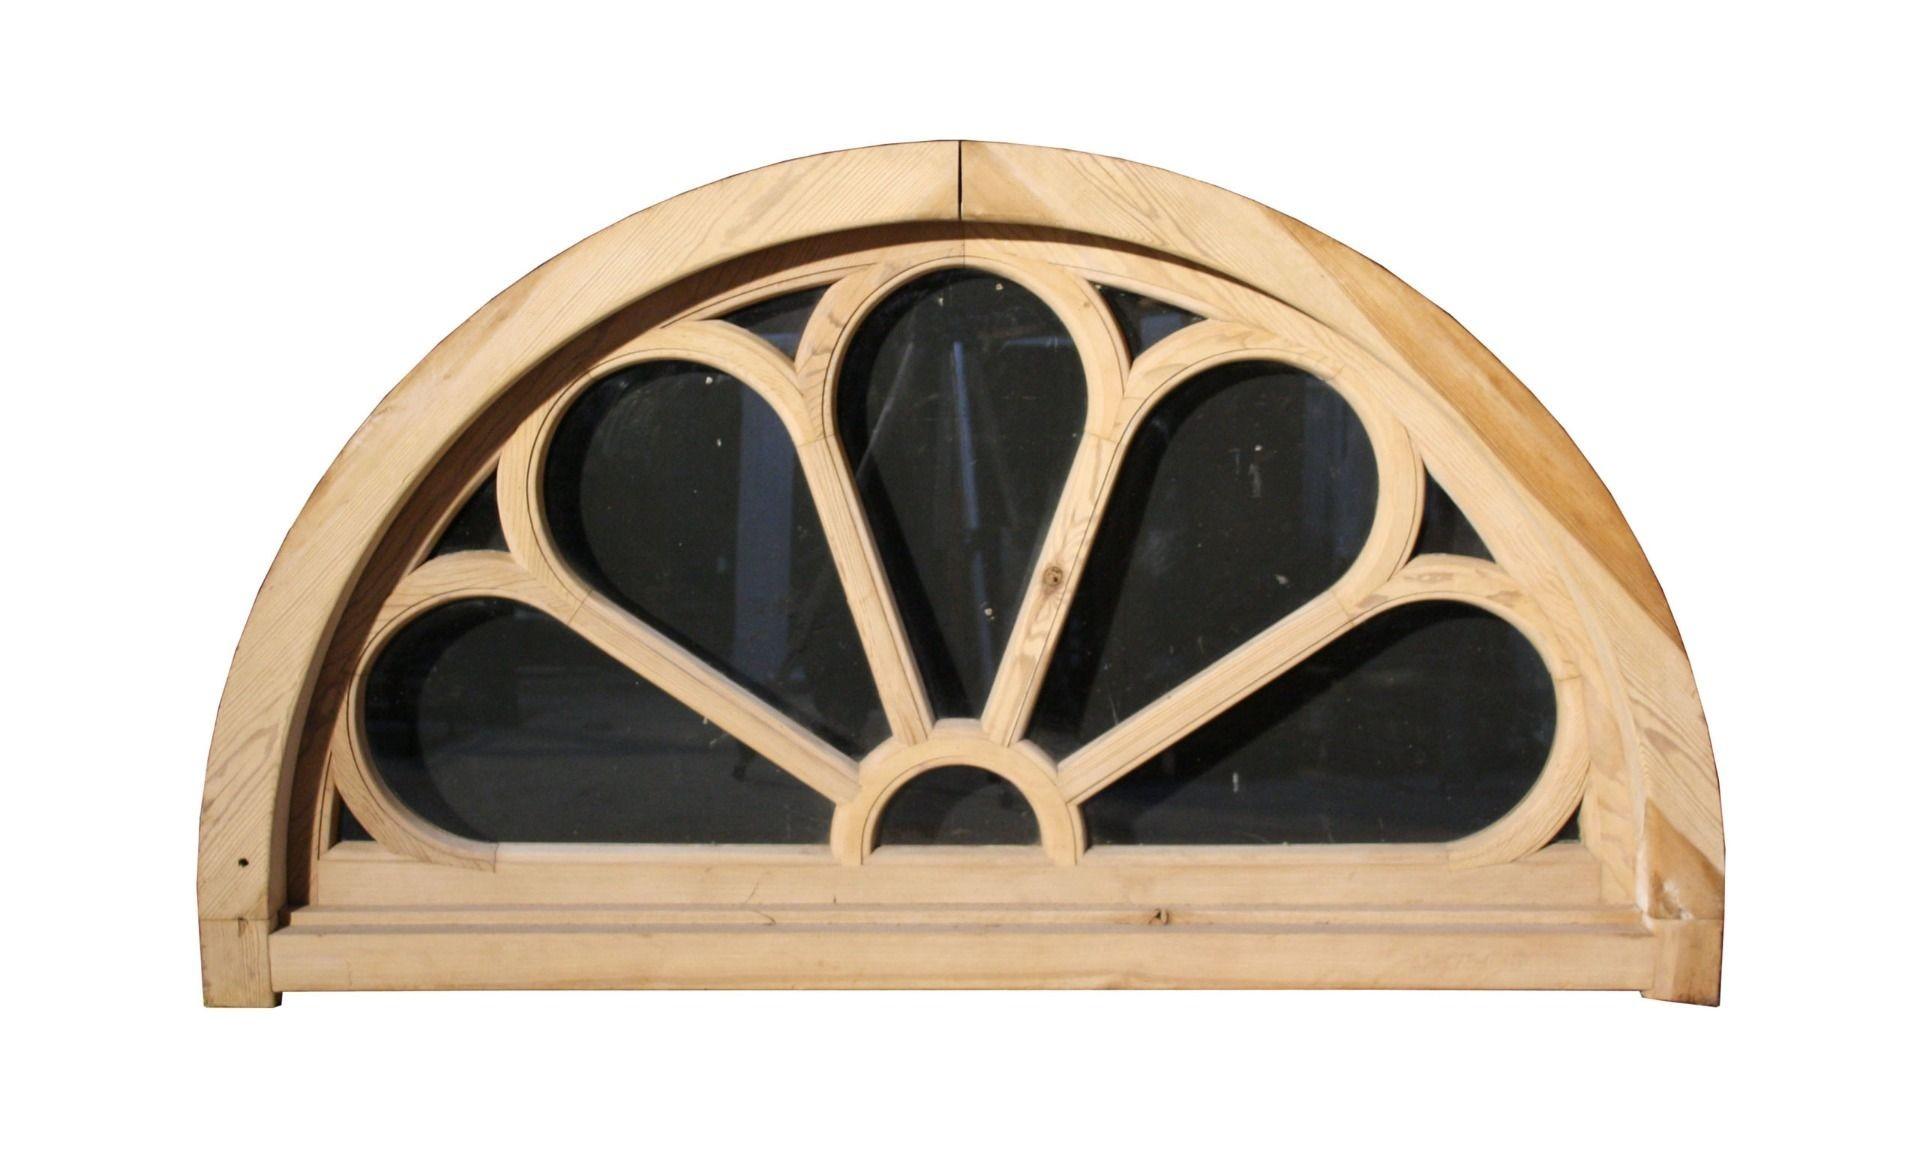 An antique fanlight constructed from pine. Glazed with clear glass and fitted within its original frame.